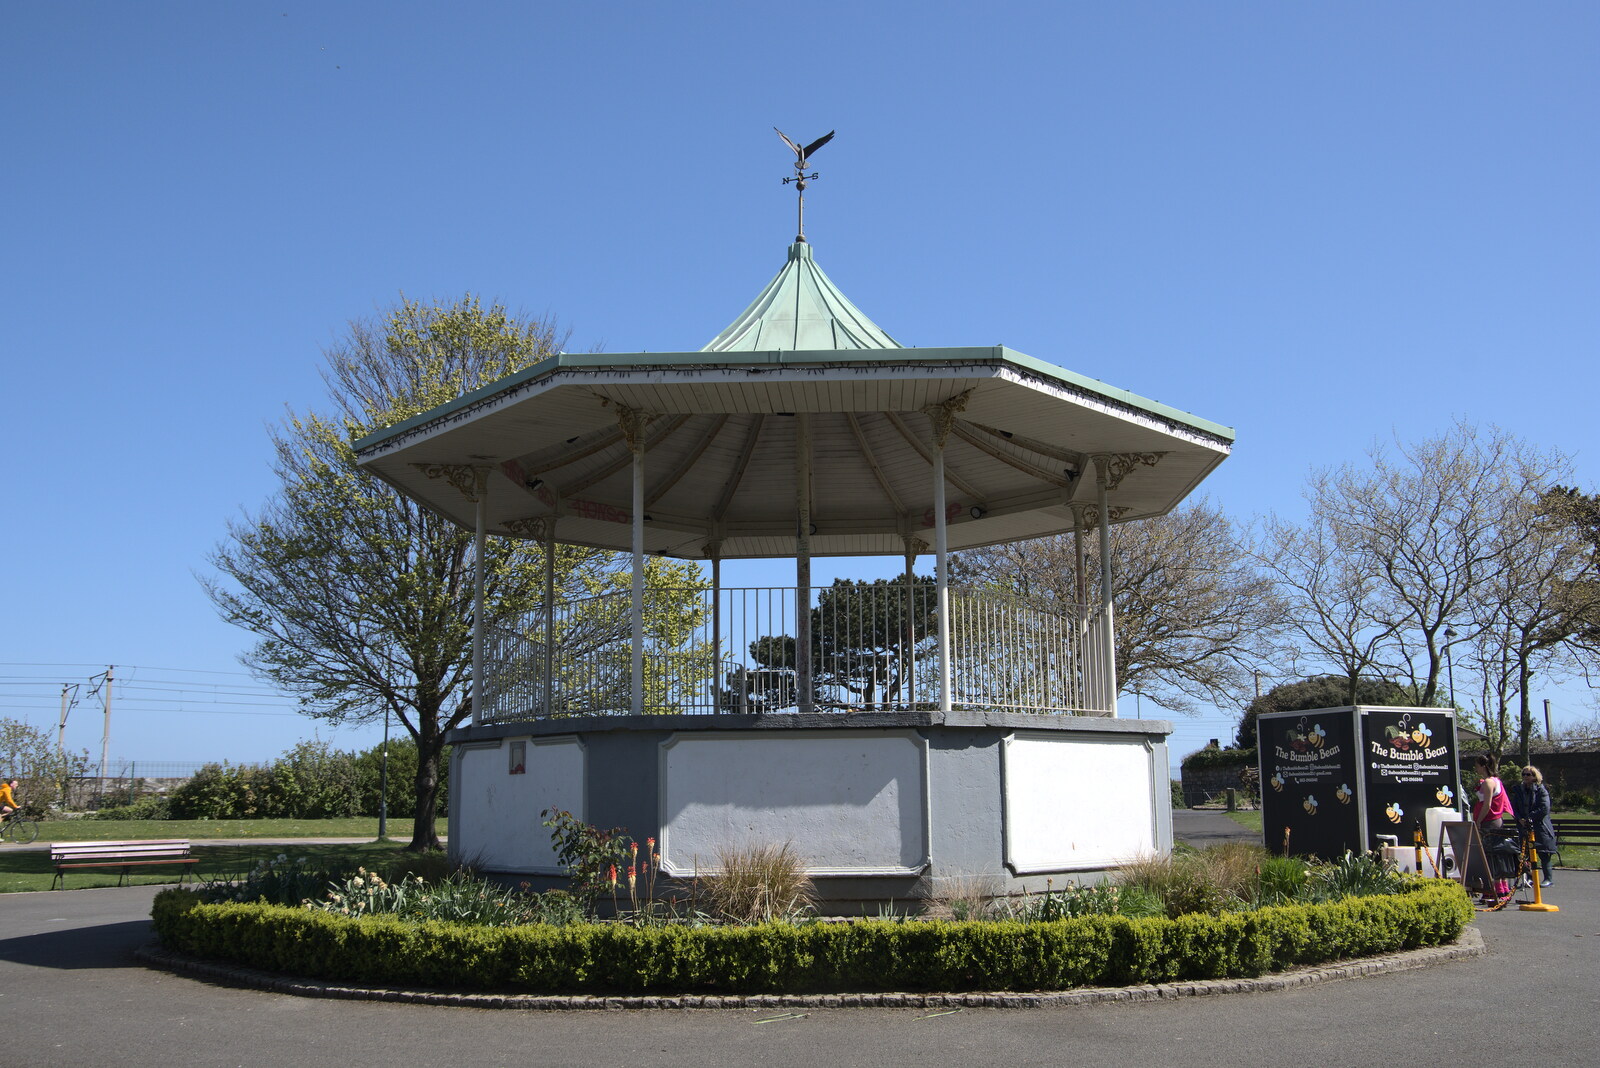 Blackrock North and South, Louth and County Dublin, Ireland - 23rd April 2022: The Blackrock Park band stand